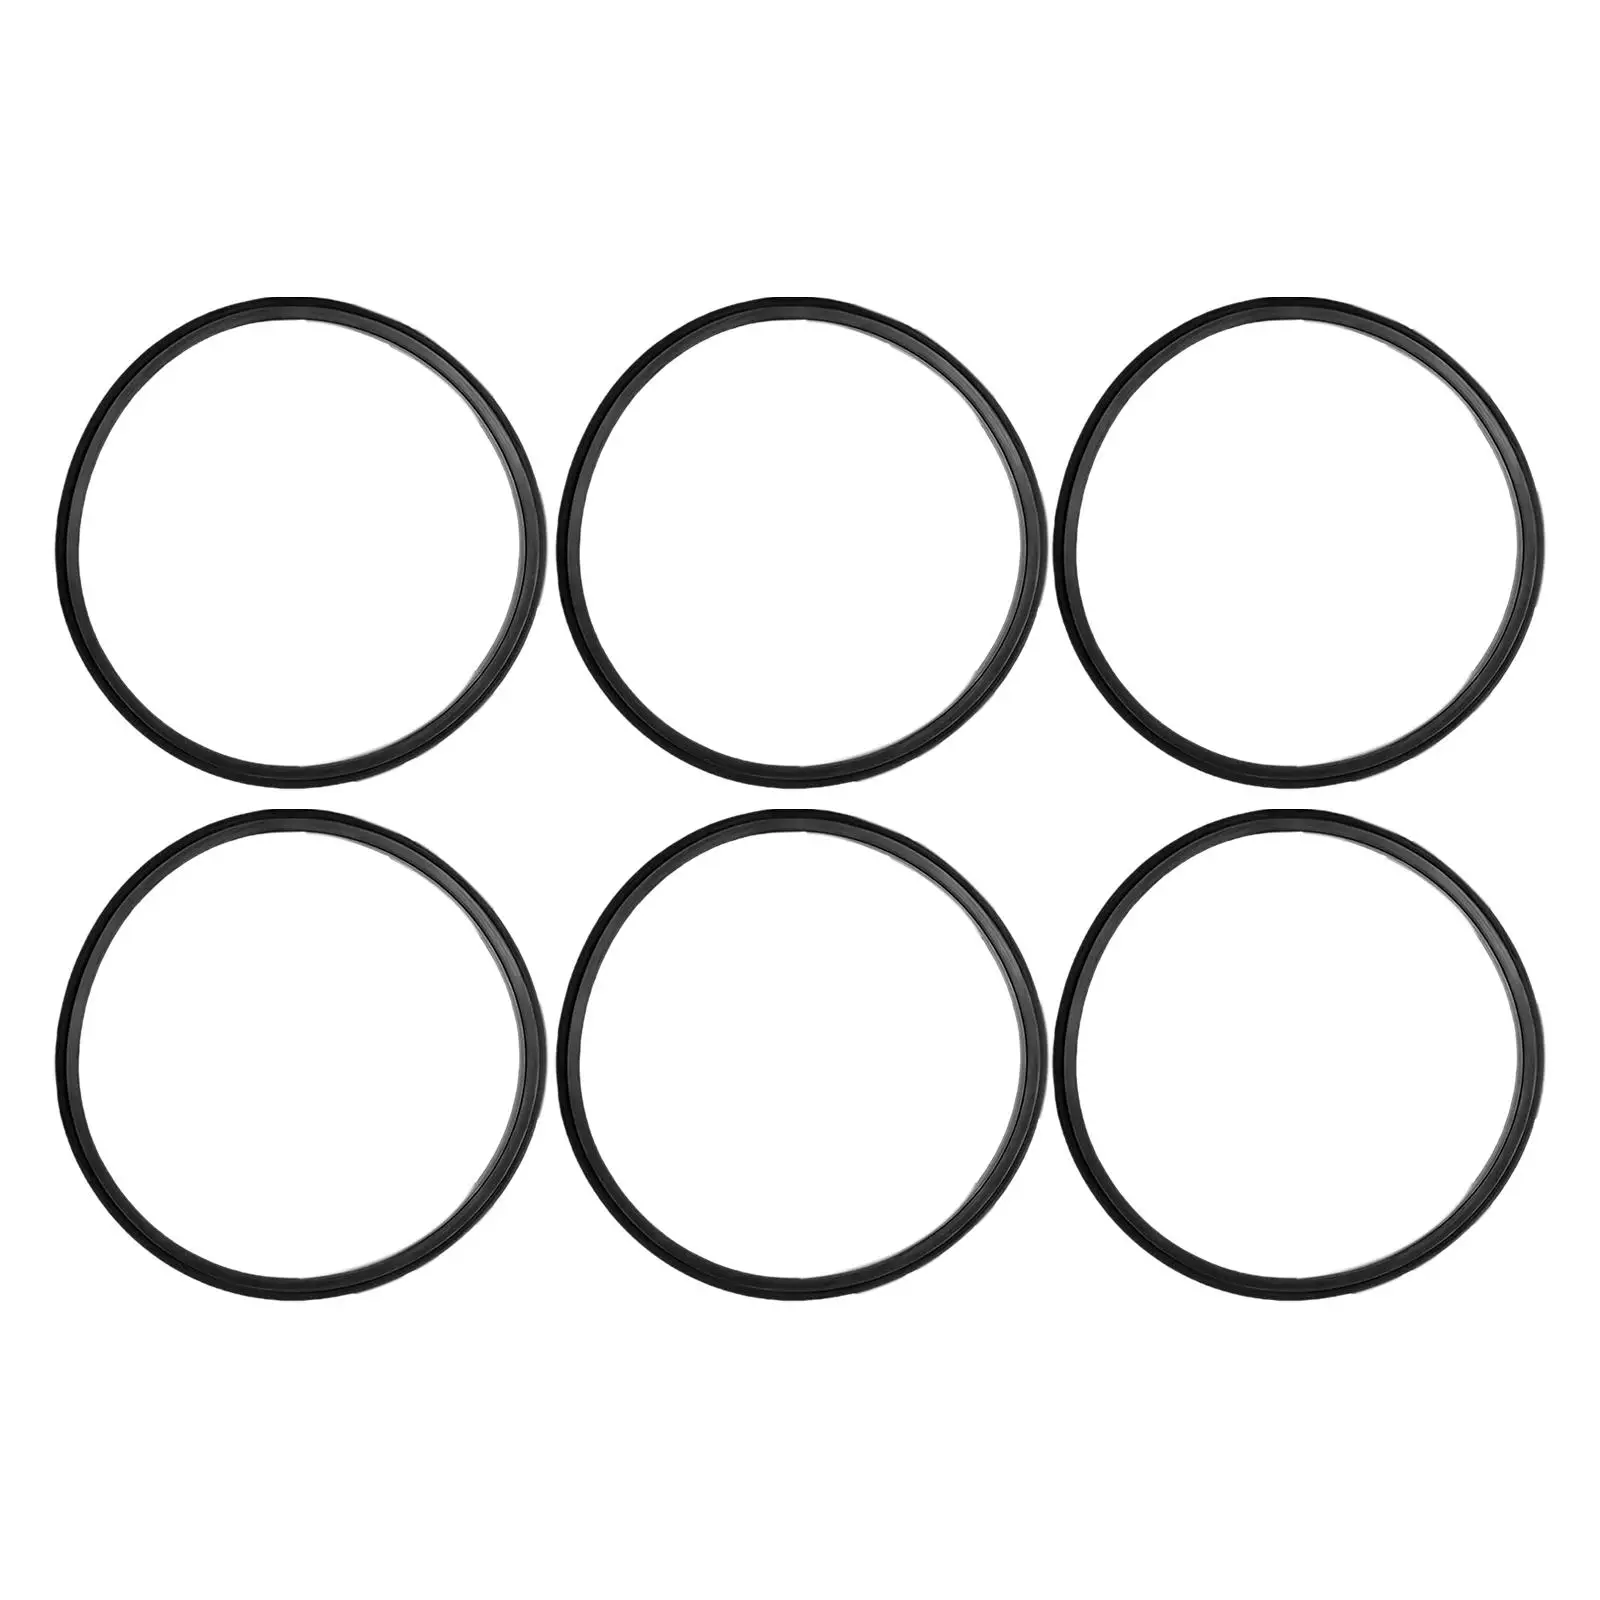 6x Silicone Jar Gasket Waterproof Pad Replacement Silicone Sealing Rings for